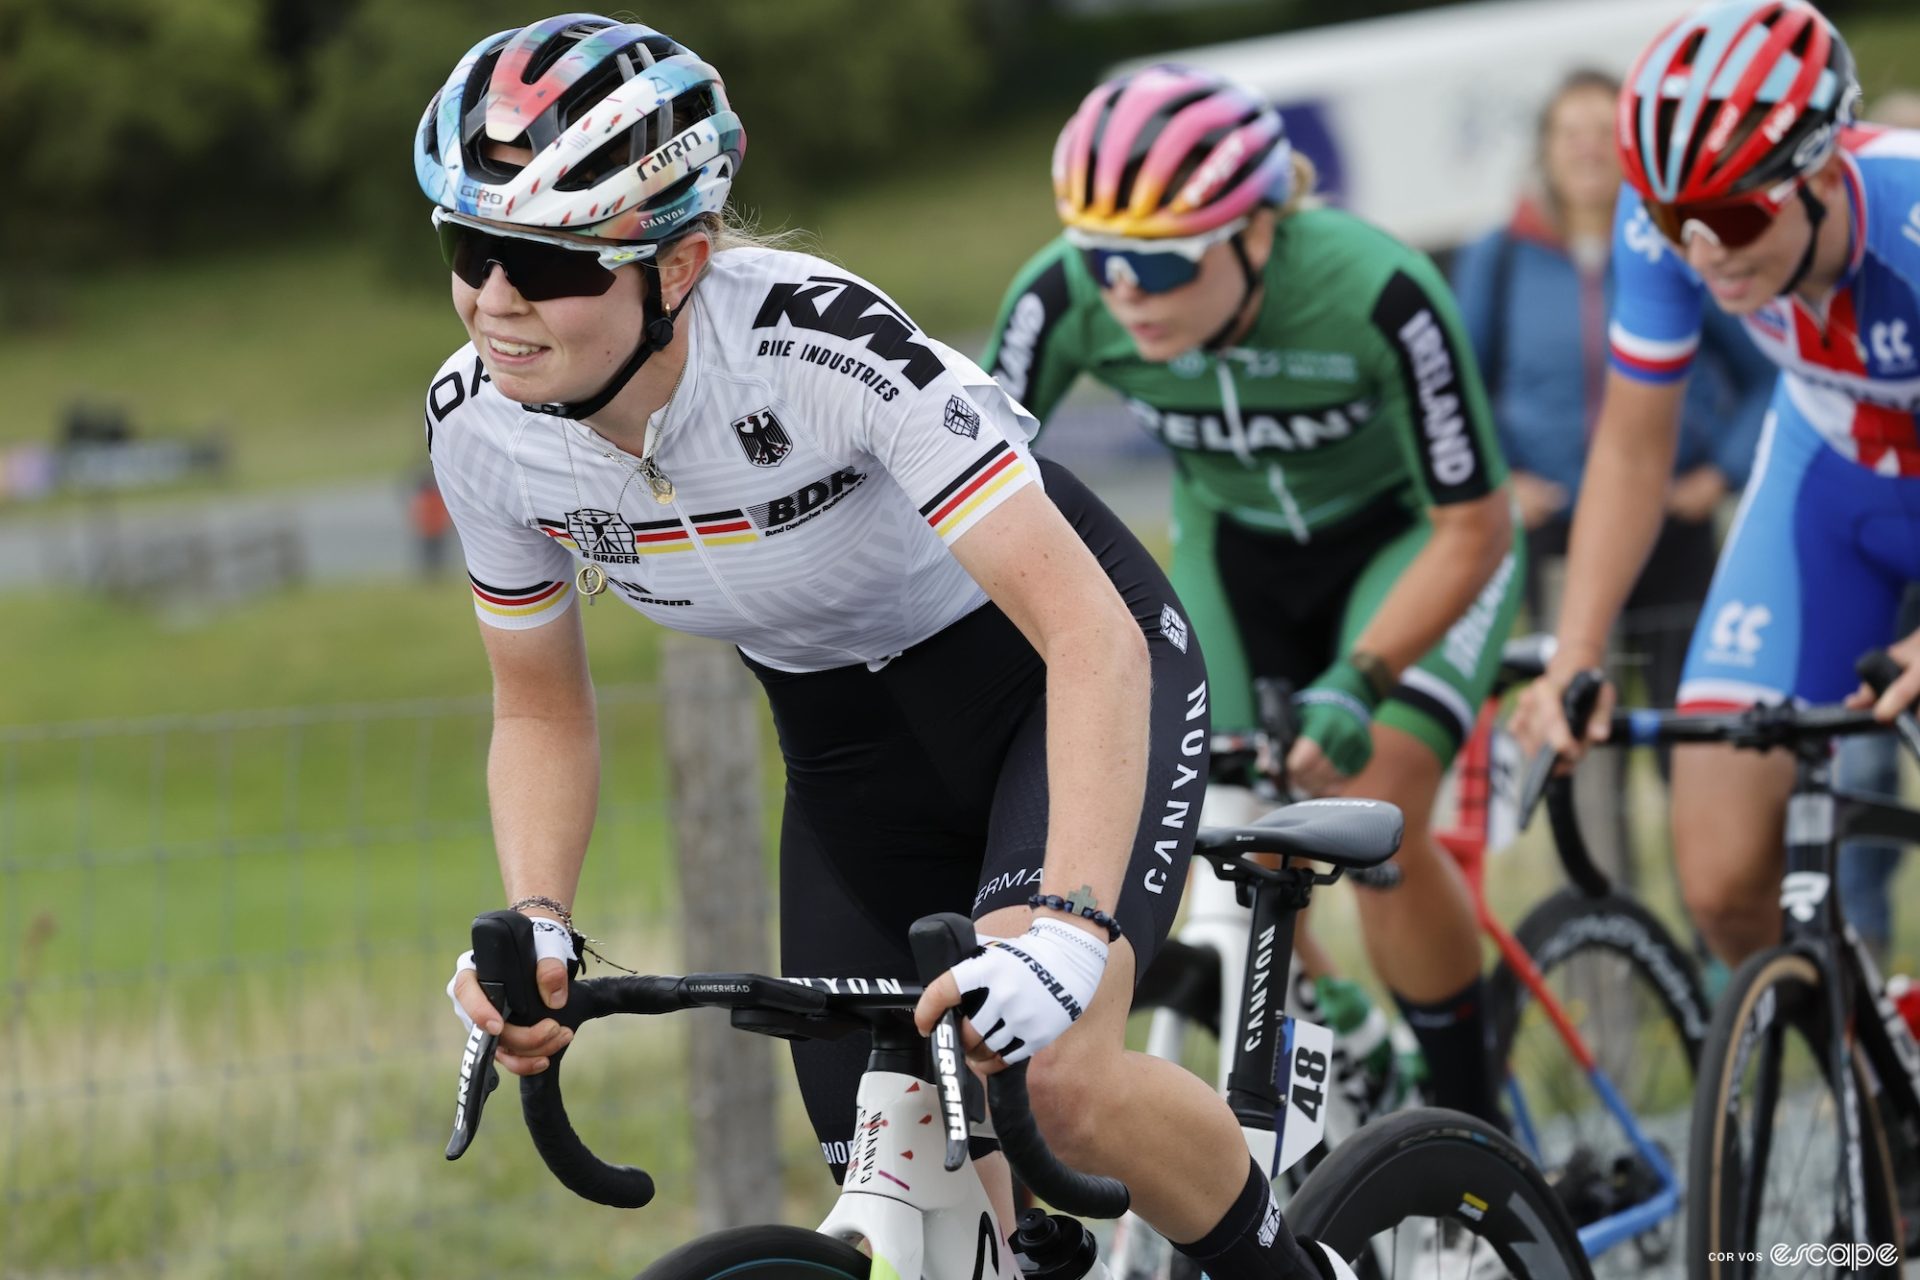 Antonia Niedermaier leads the peloton representing Germany during the U23 European Championships. 